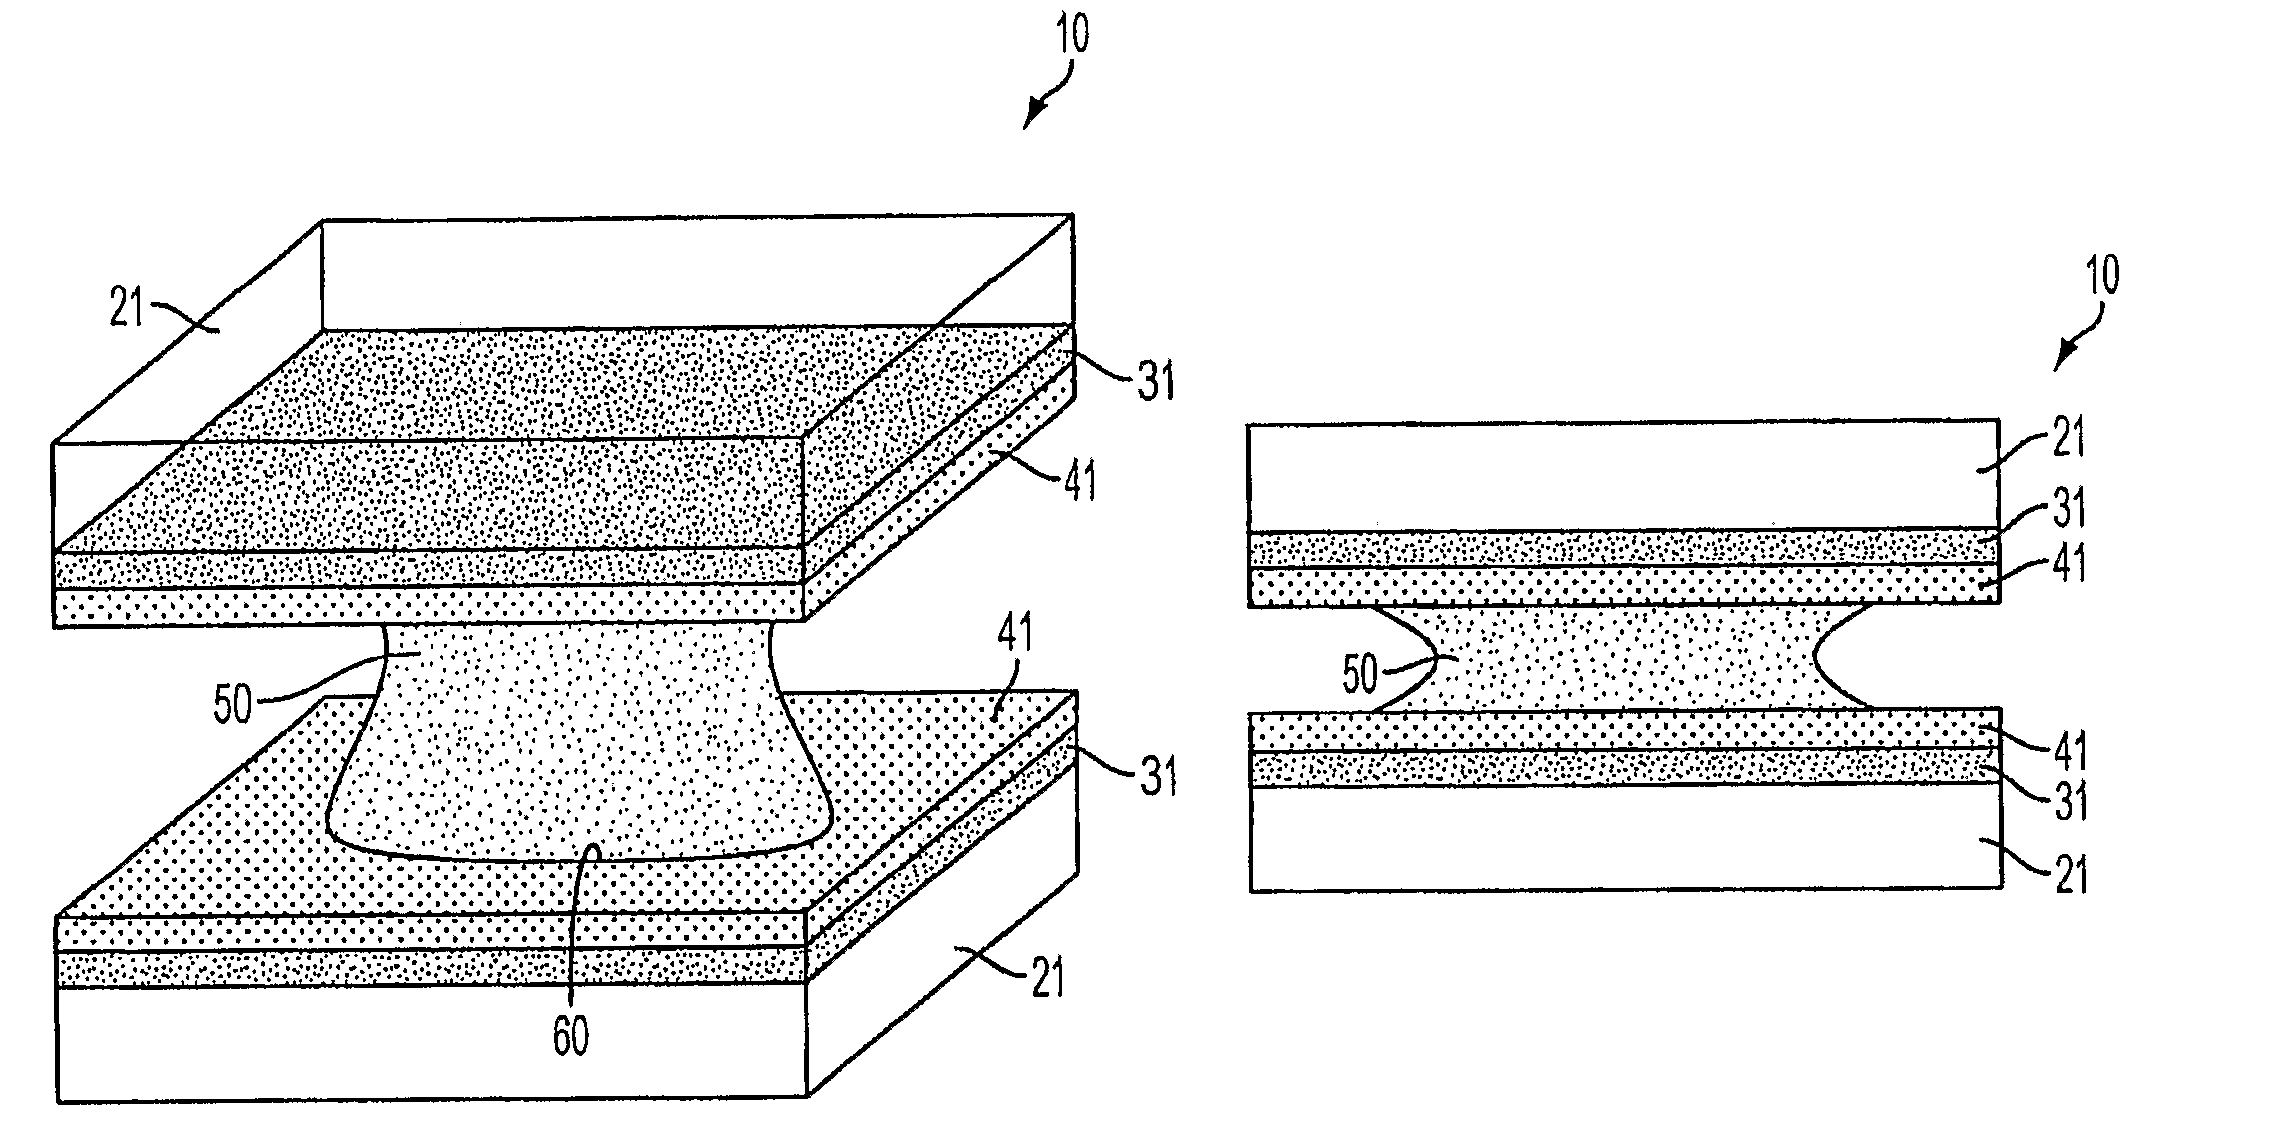 Capillary force actuator device and related method of applications